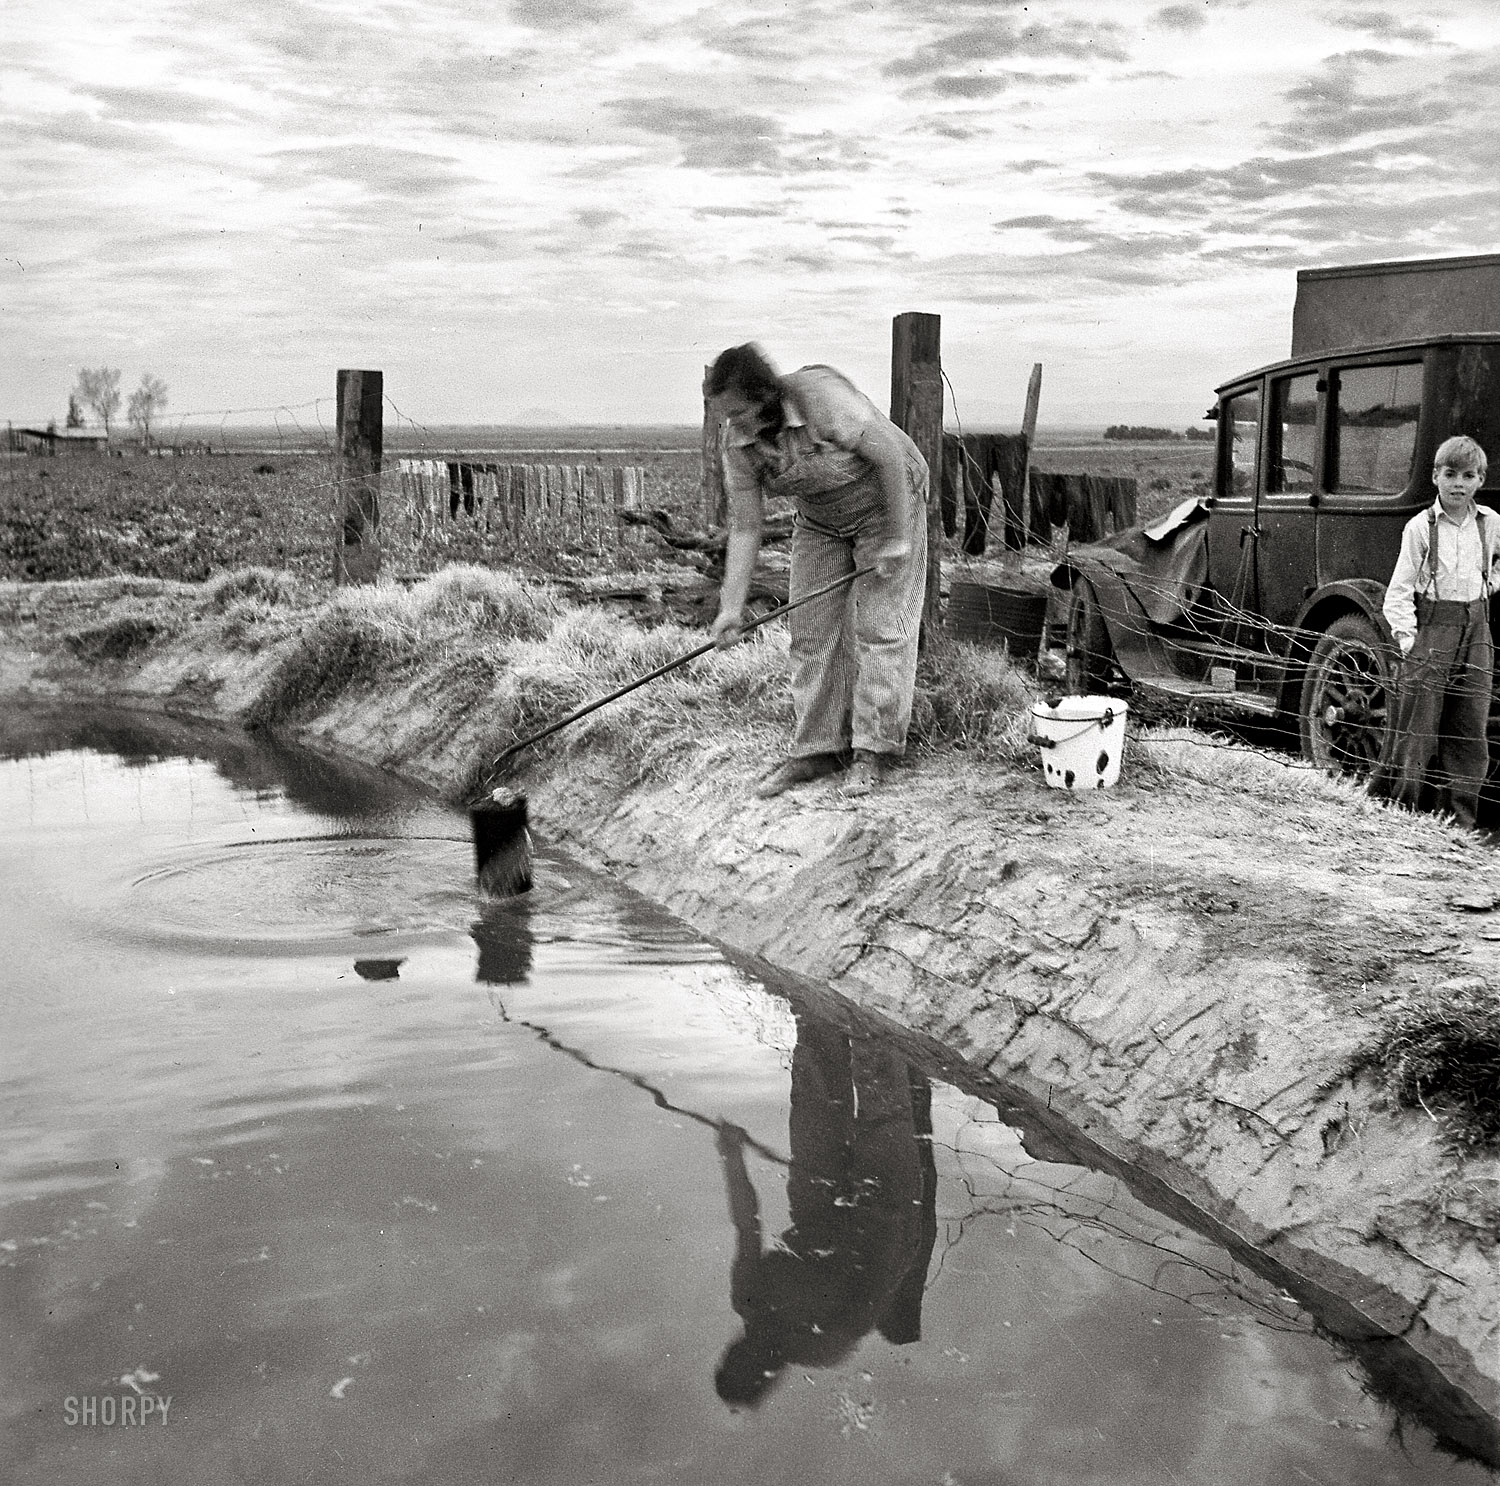 March 1937. "Water supply: Open settling basin from the irrigation ditch in a California squatter camp near Calipatria." Medium-format nitrate negative by Dorothea Lange for the Resettlement Administration. View full size.